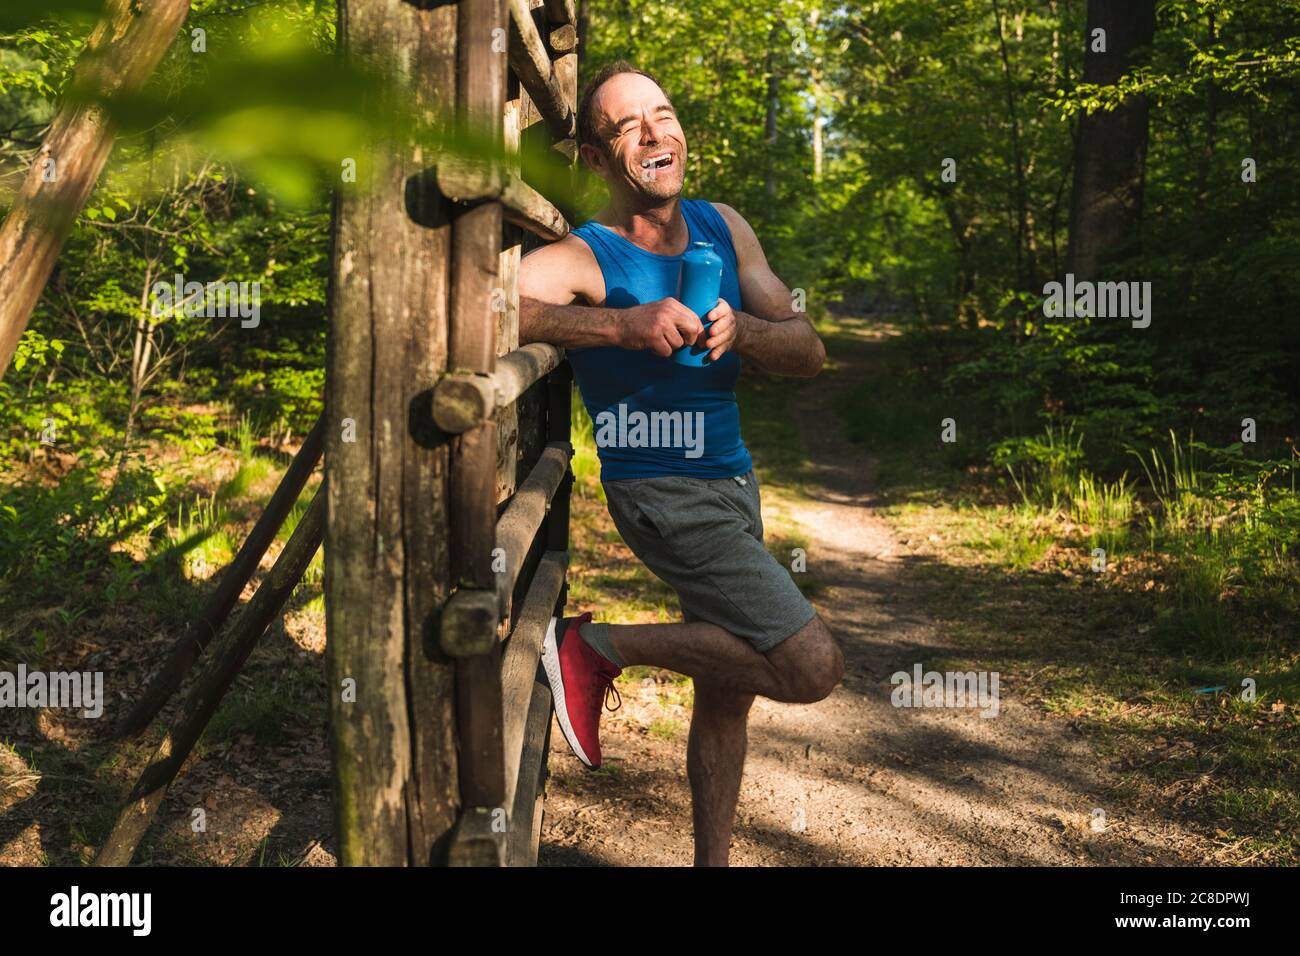 Happy man looking away while standing with water bottle against wood at park Stock Photo